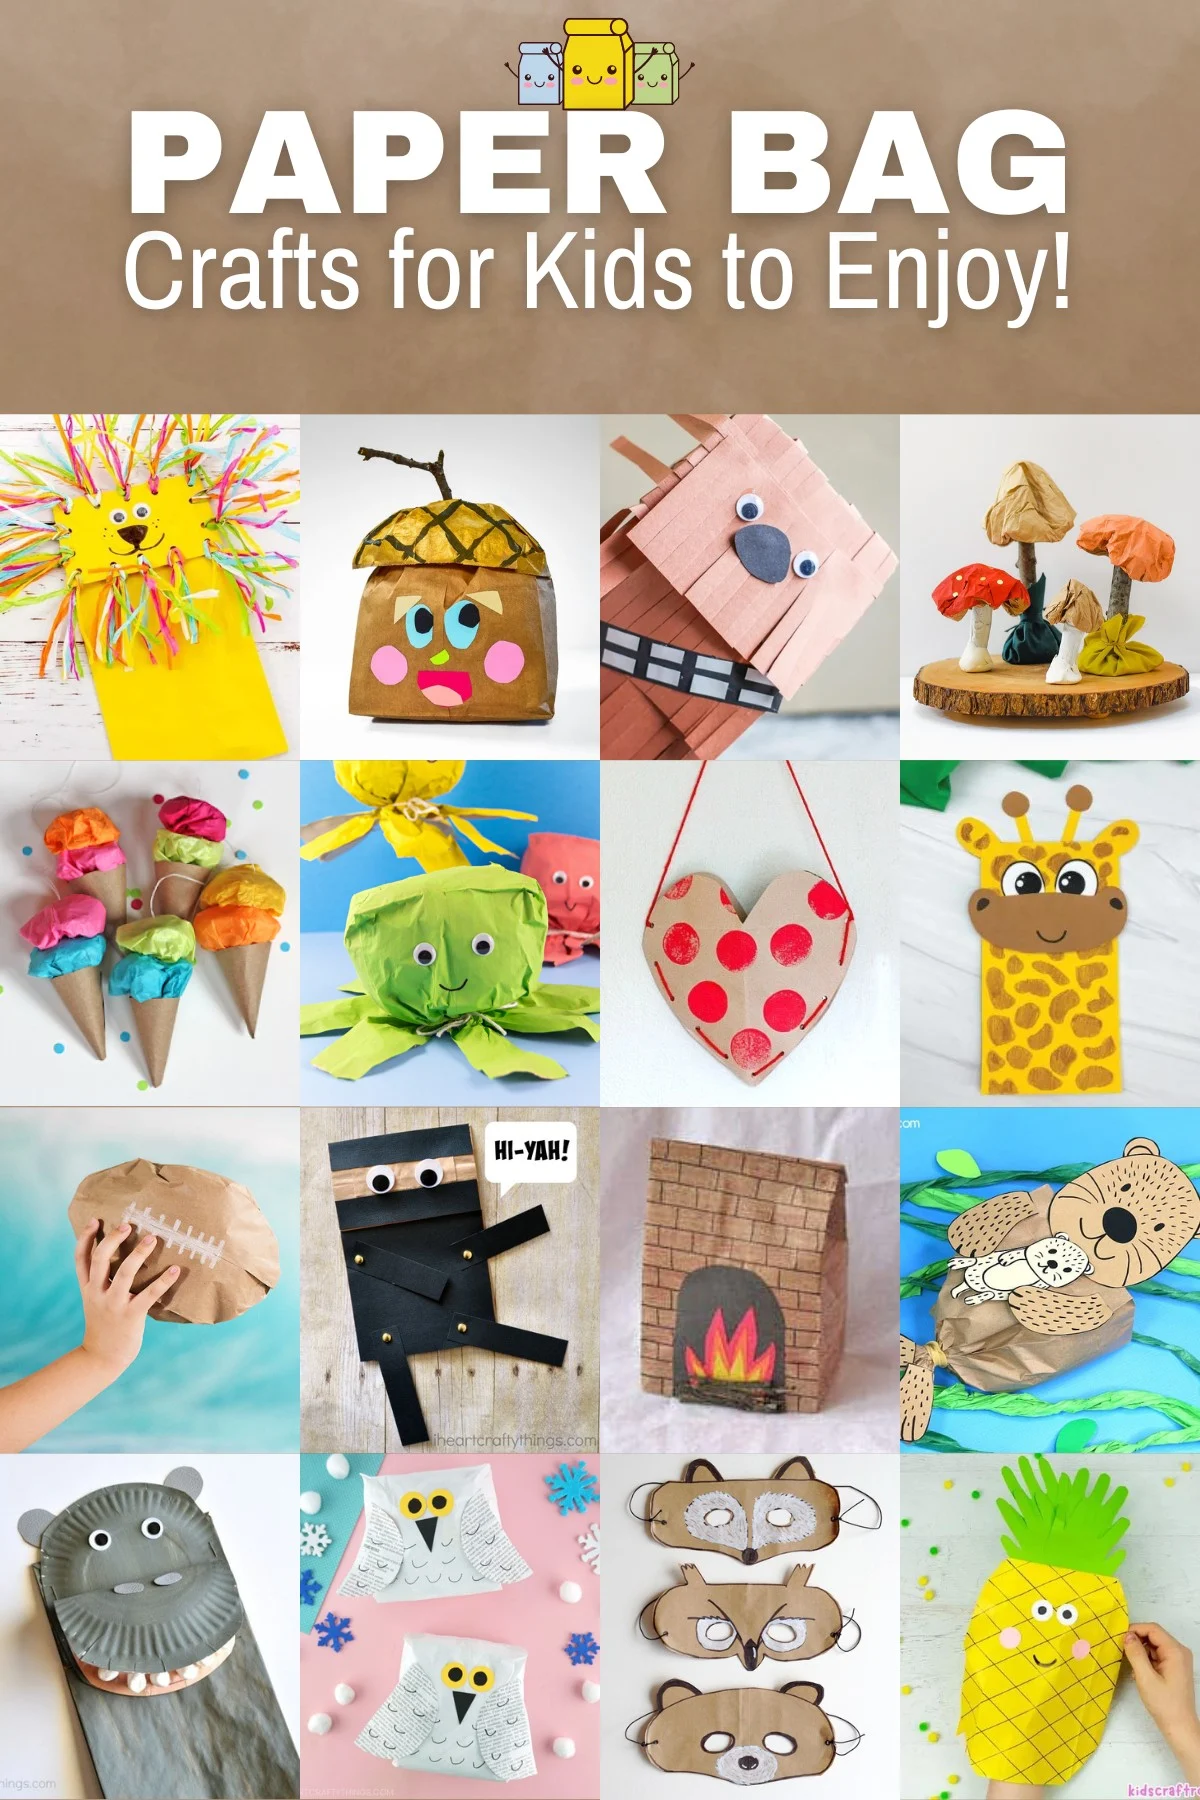 30+ arts and crafts ideas for toddlers of 2 and 3 years - Gathered